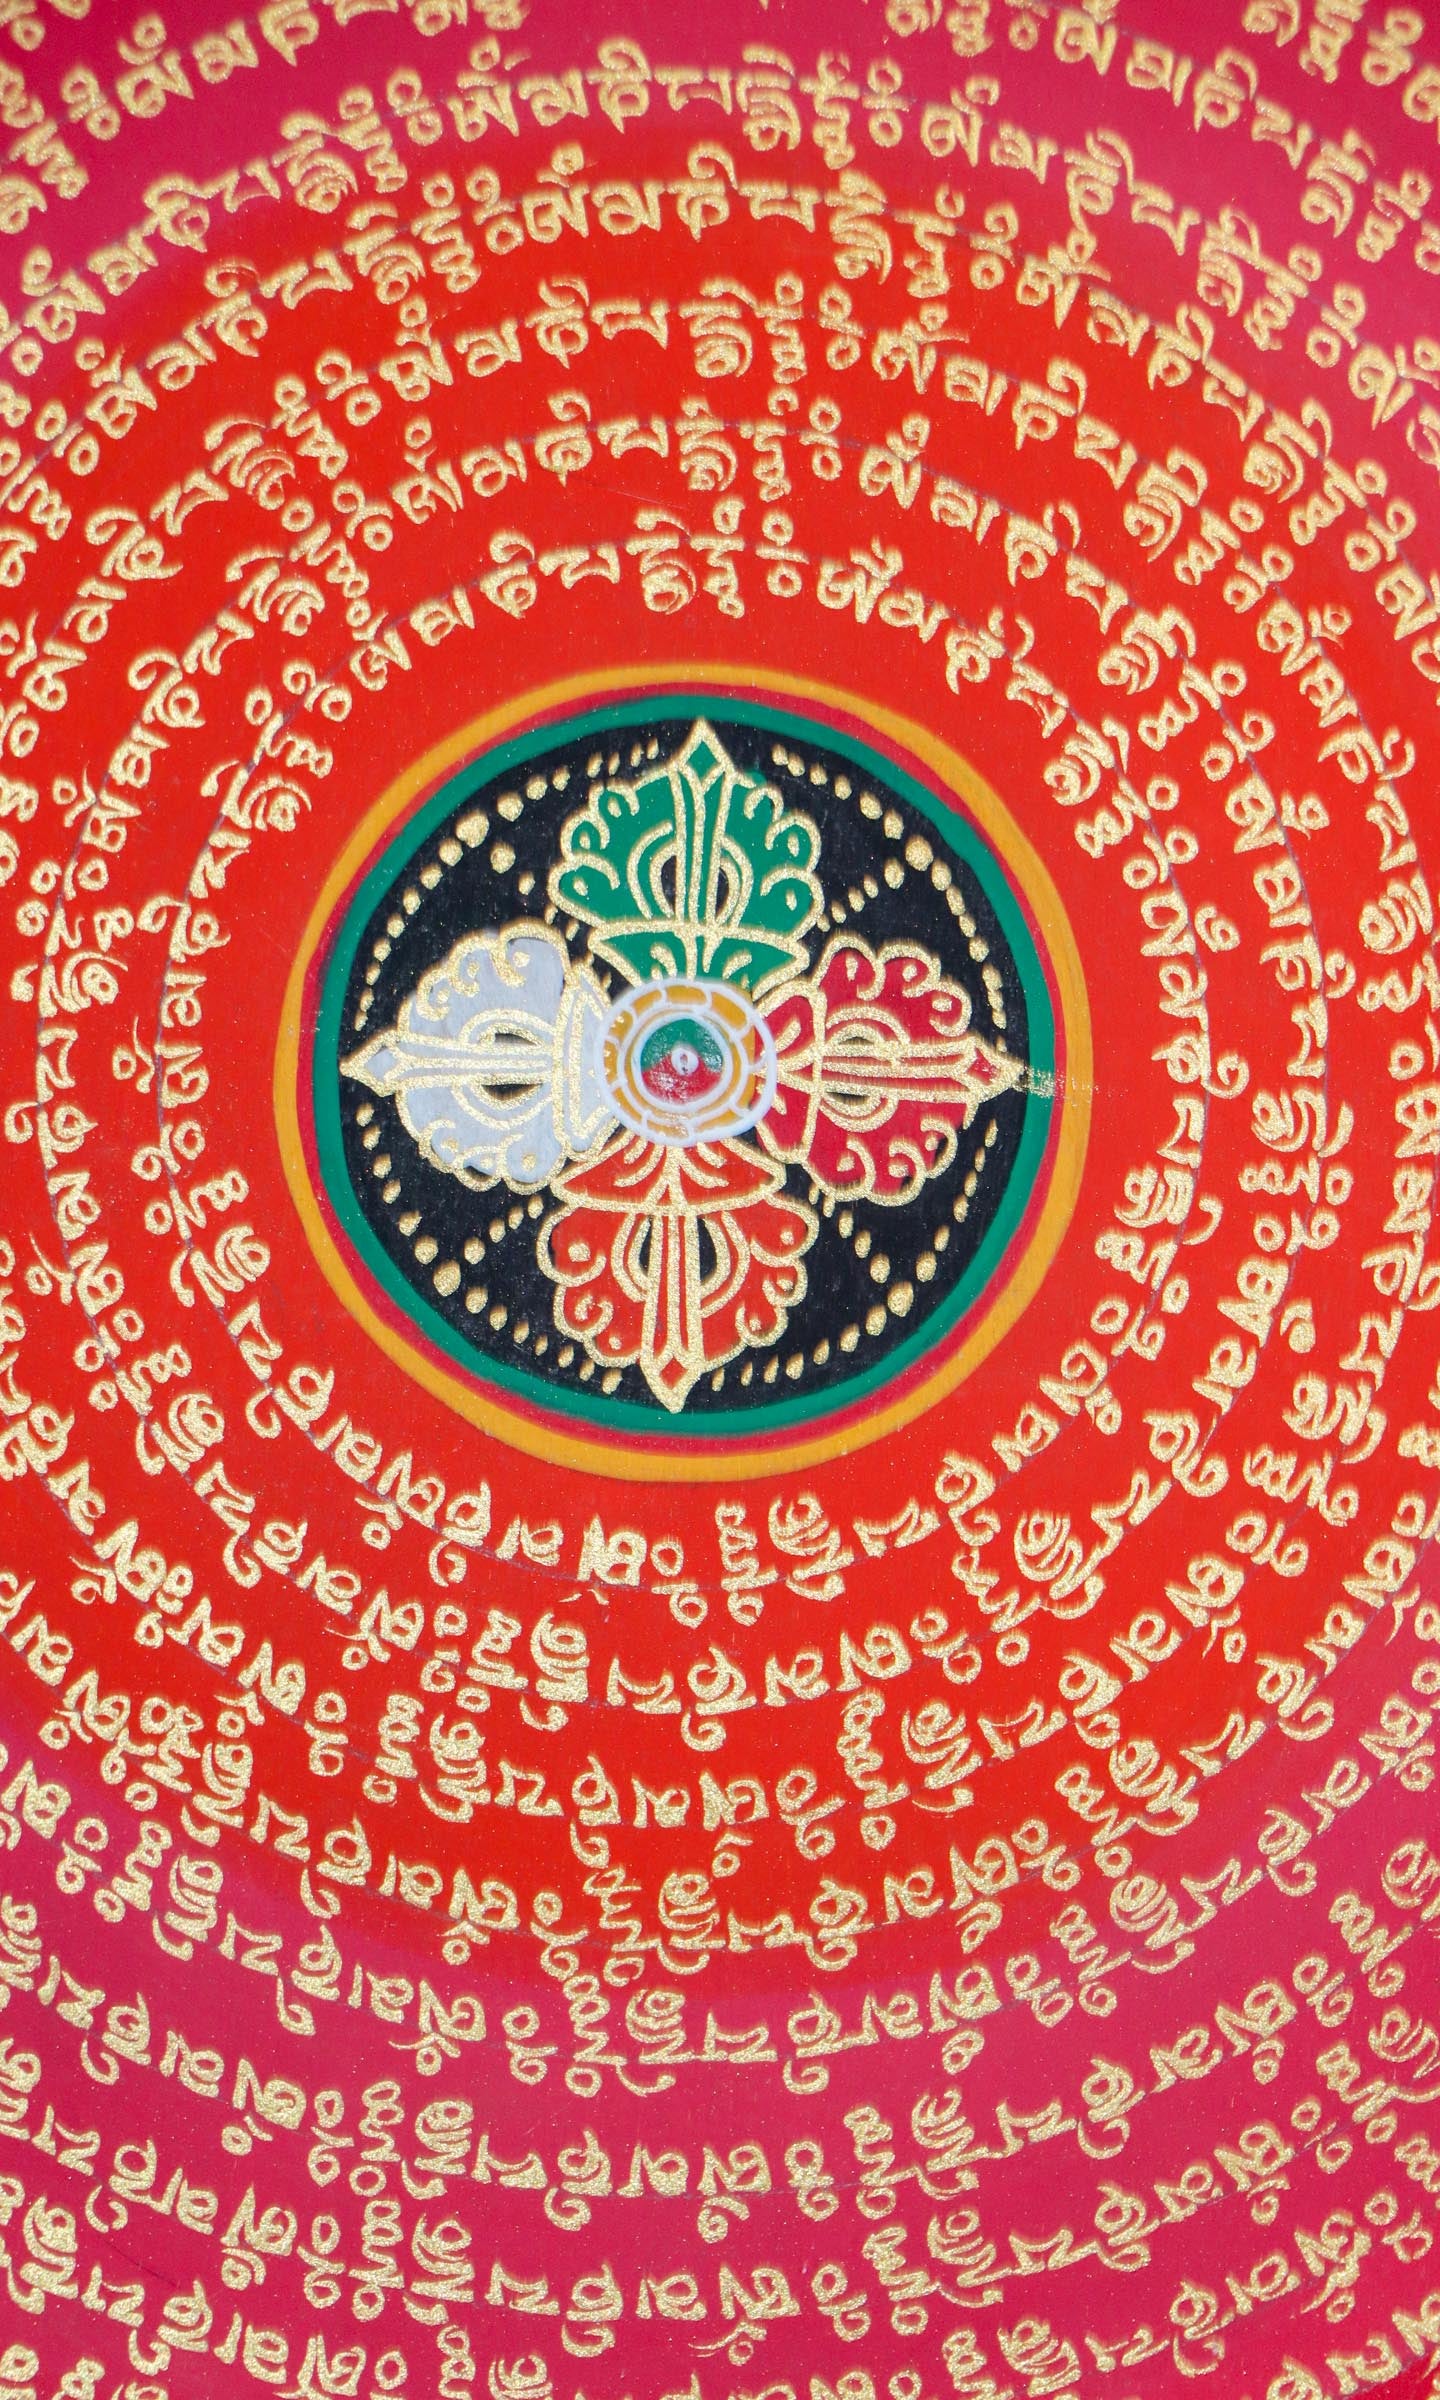 Mantra Mandala with 8 auspicious symbol thangka painting with Bajra at the center for wall hanging